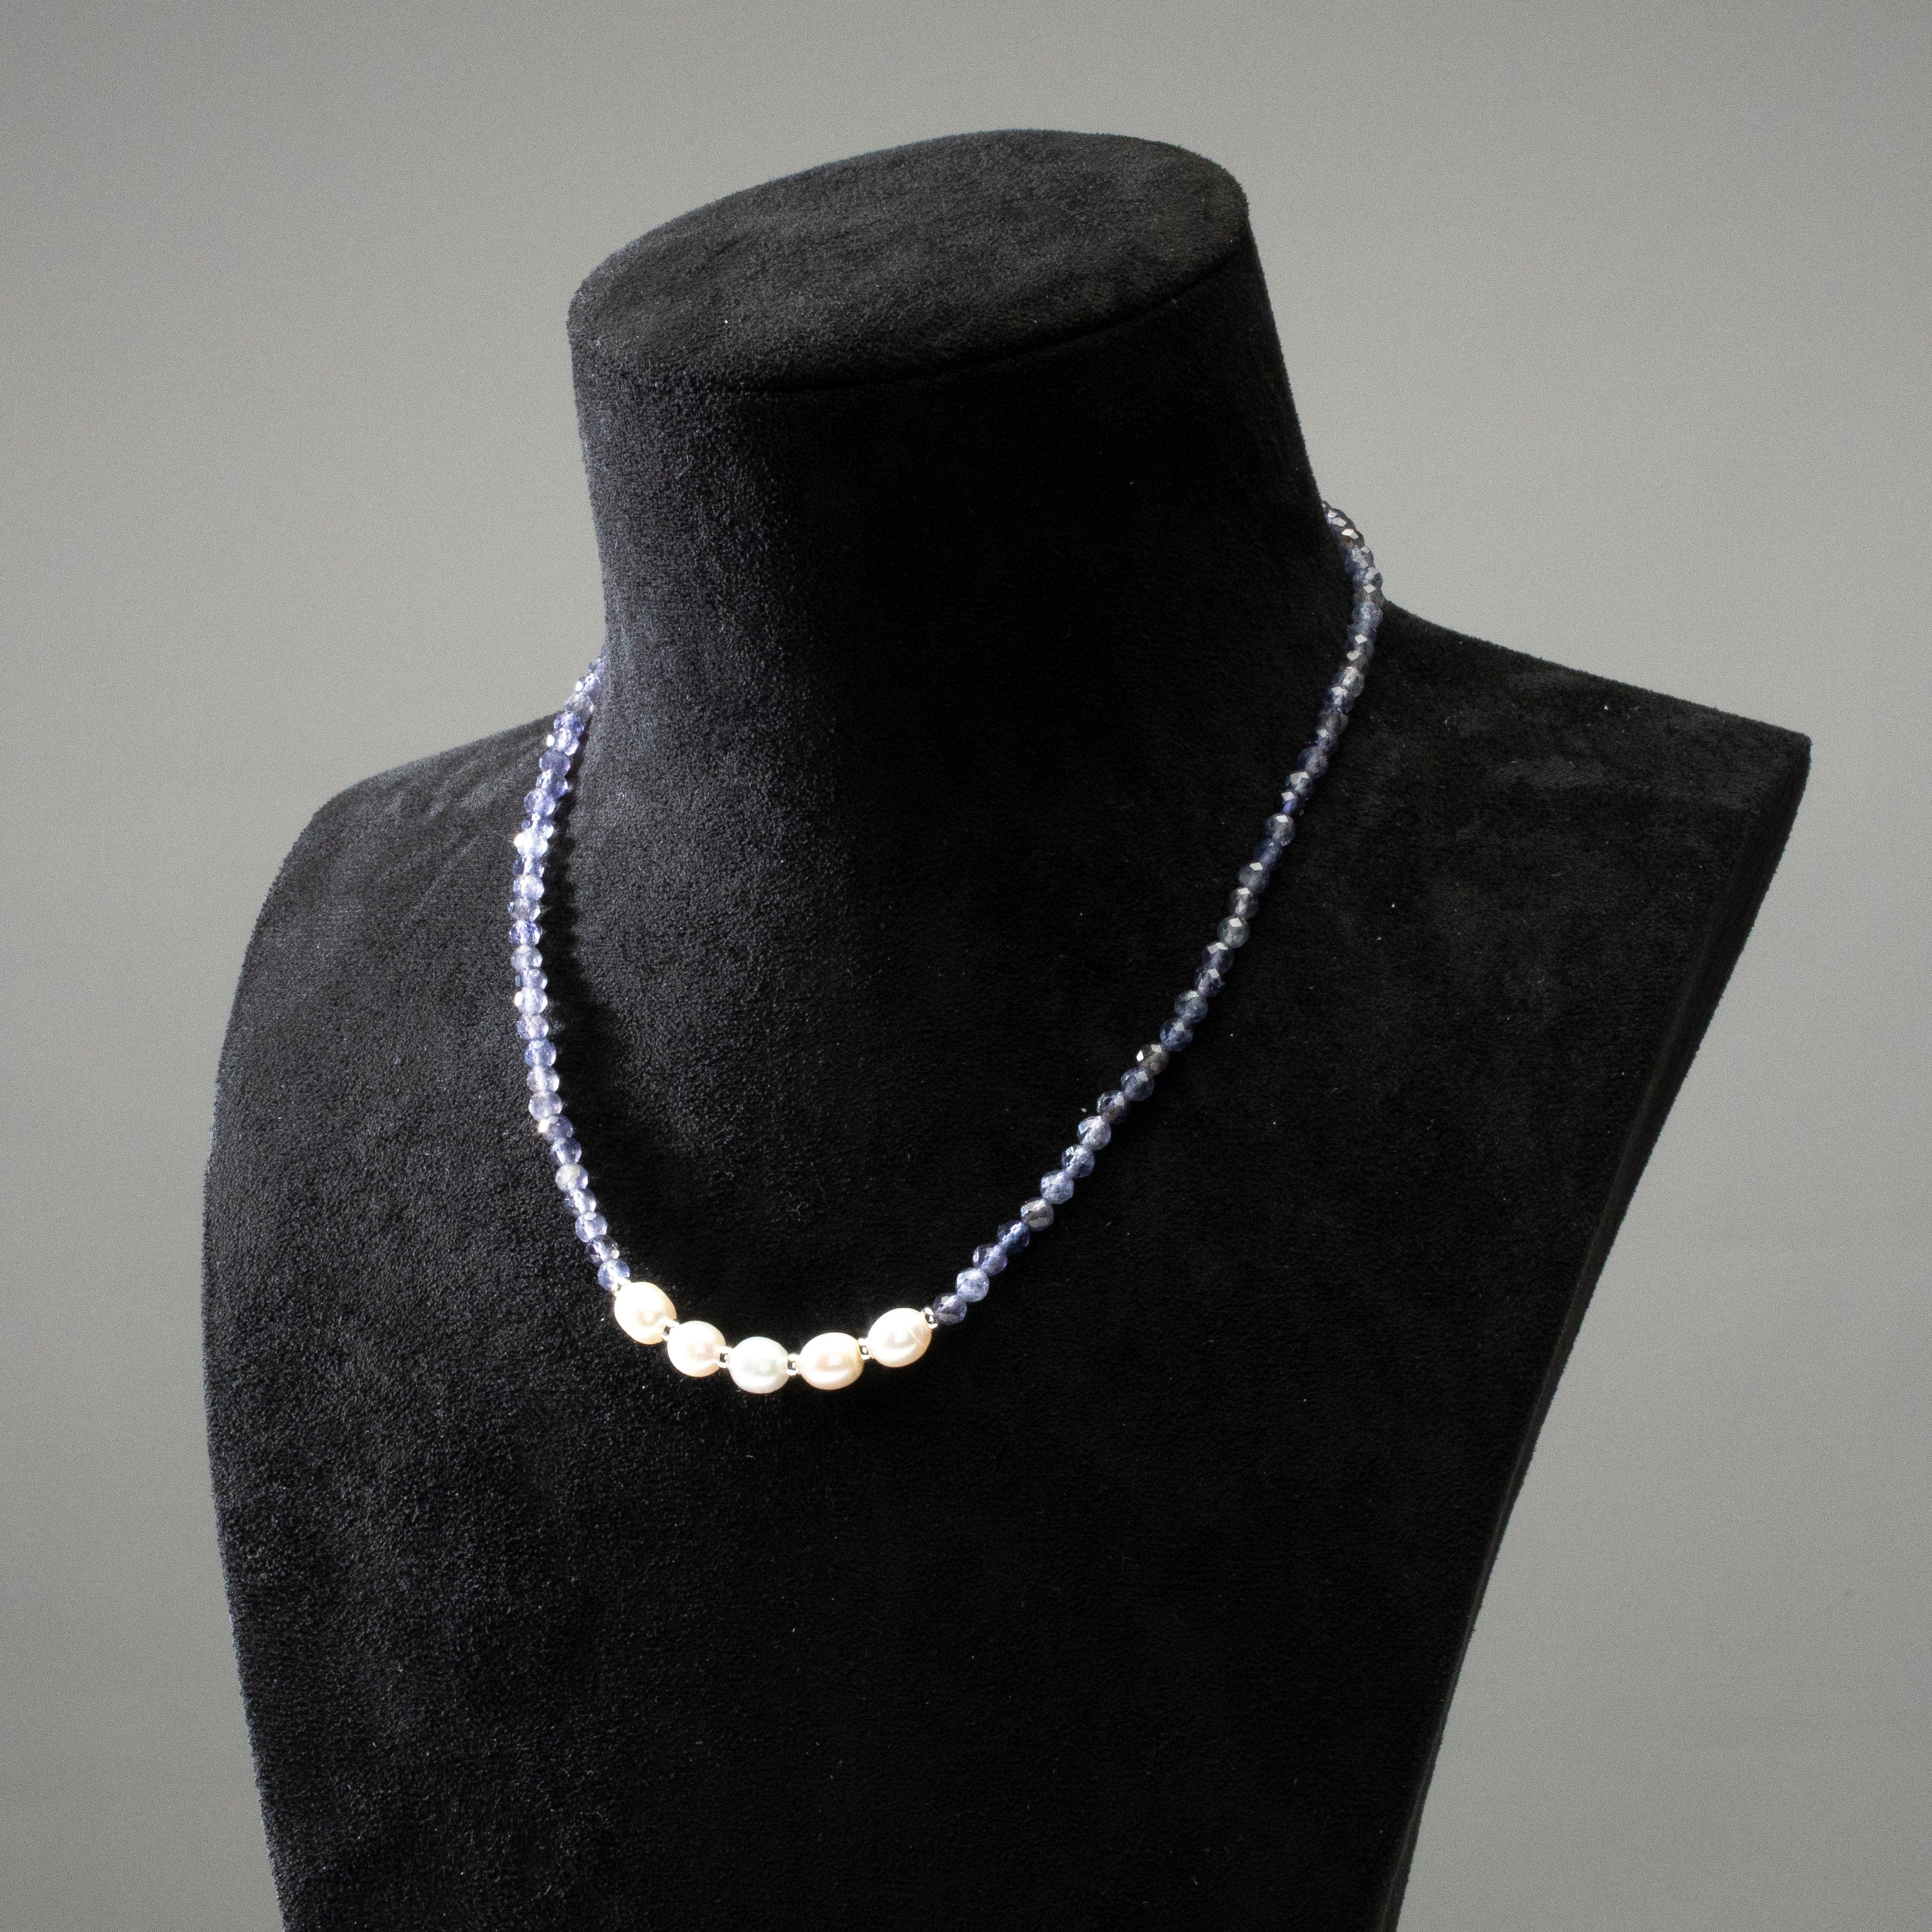 KALIFANO Jewelry 4mm Faceted Iolite Bead Necklace with 5 Pearls with 925 Silver Clasp 4MIO